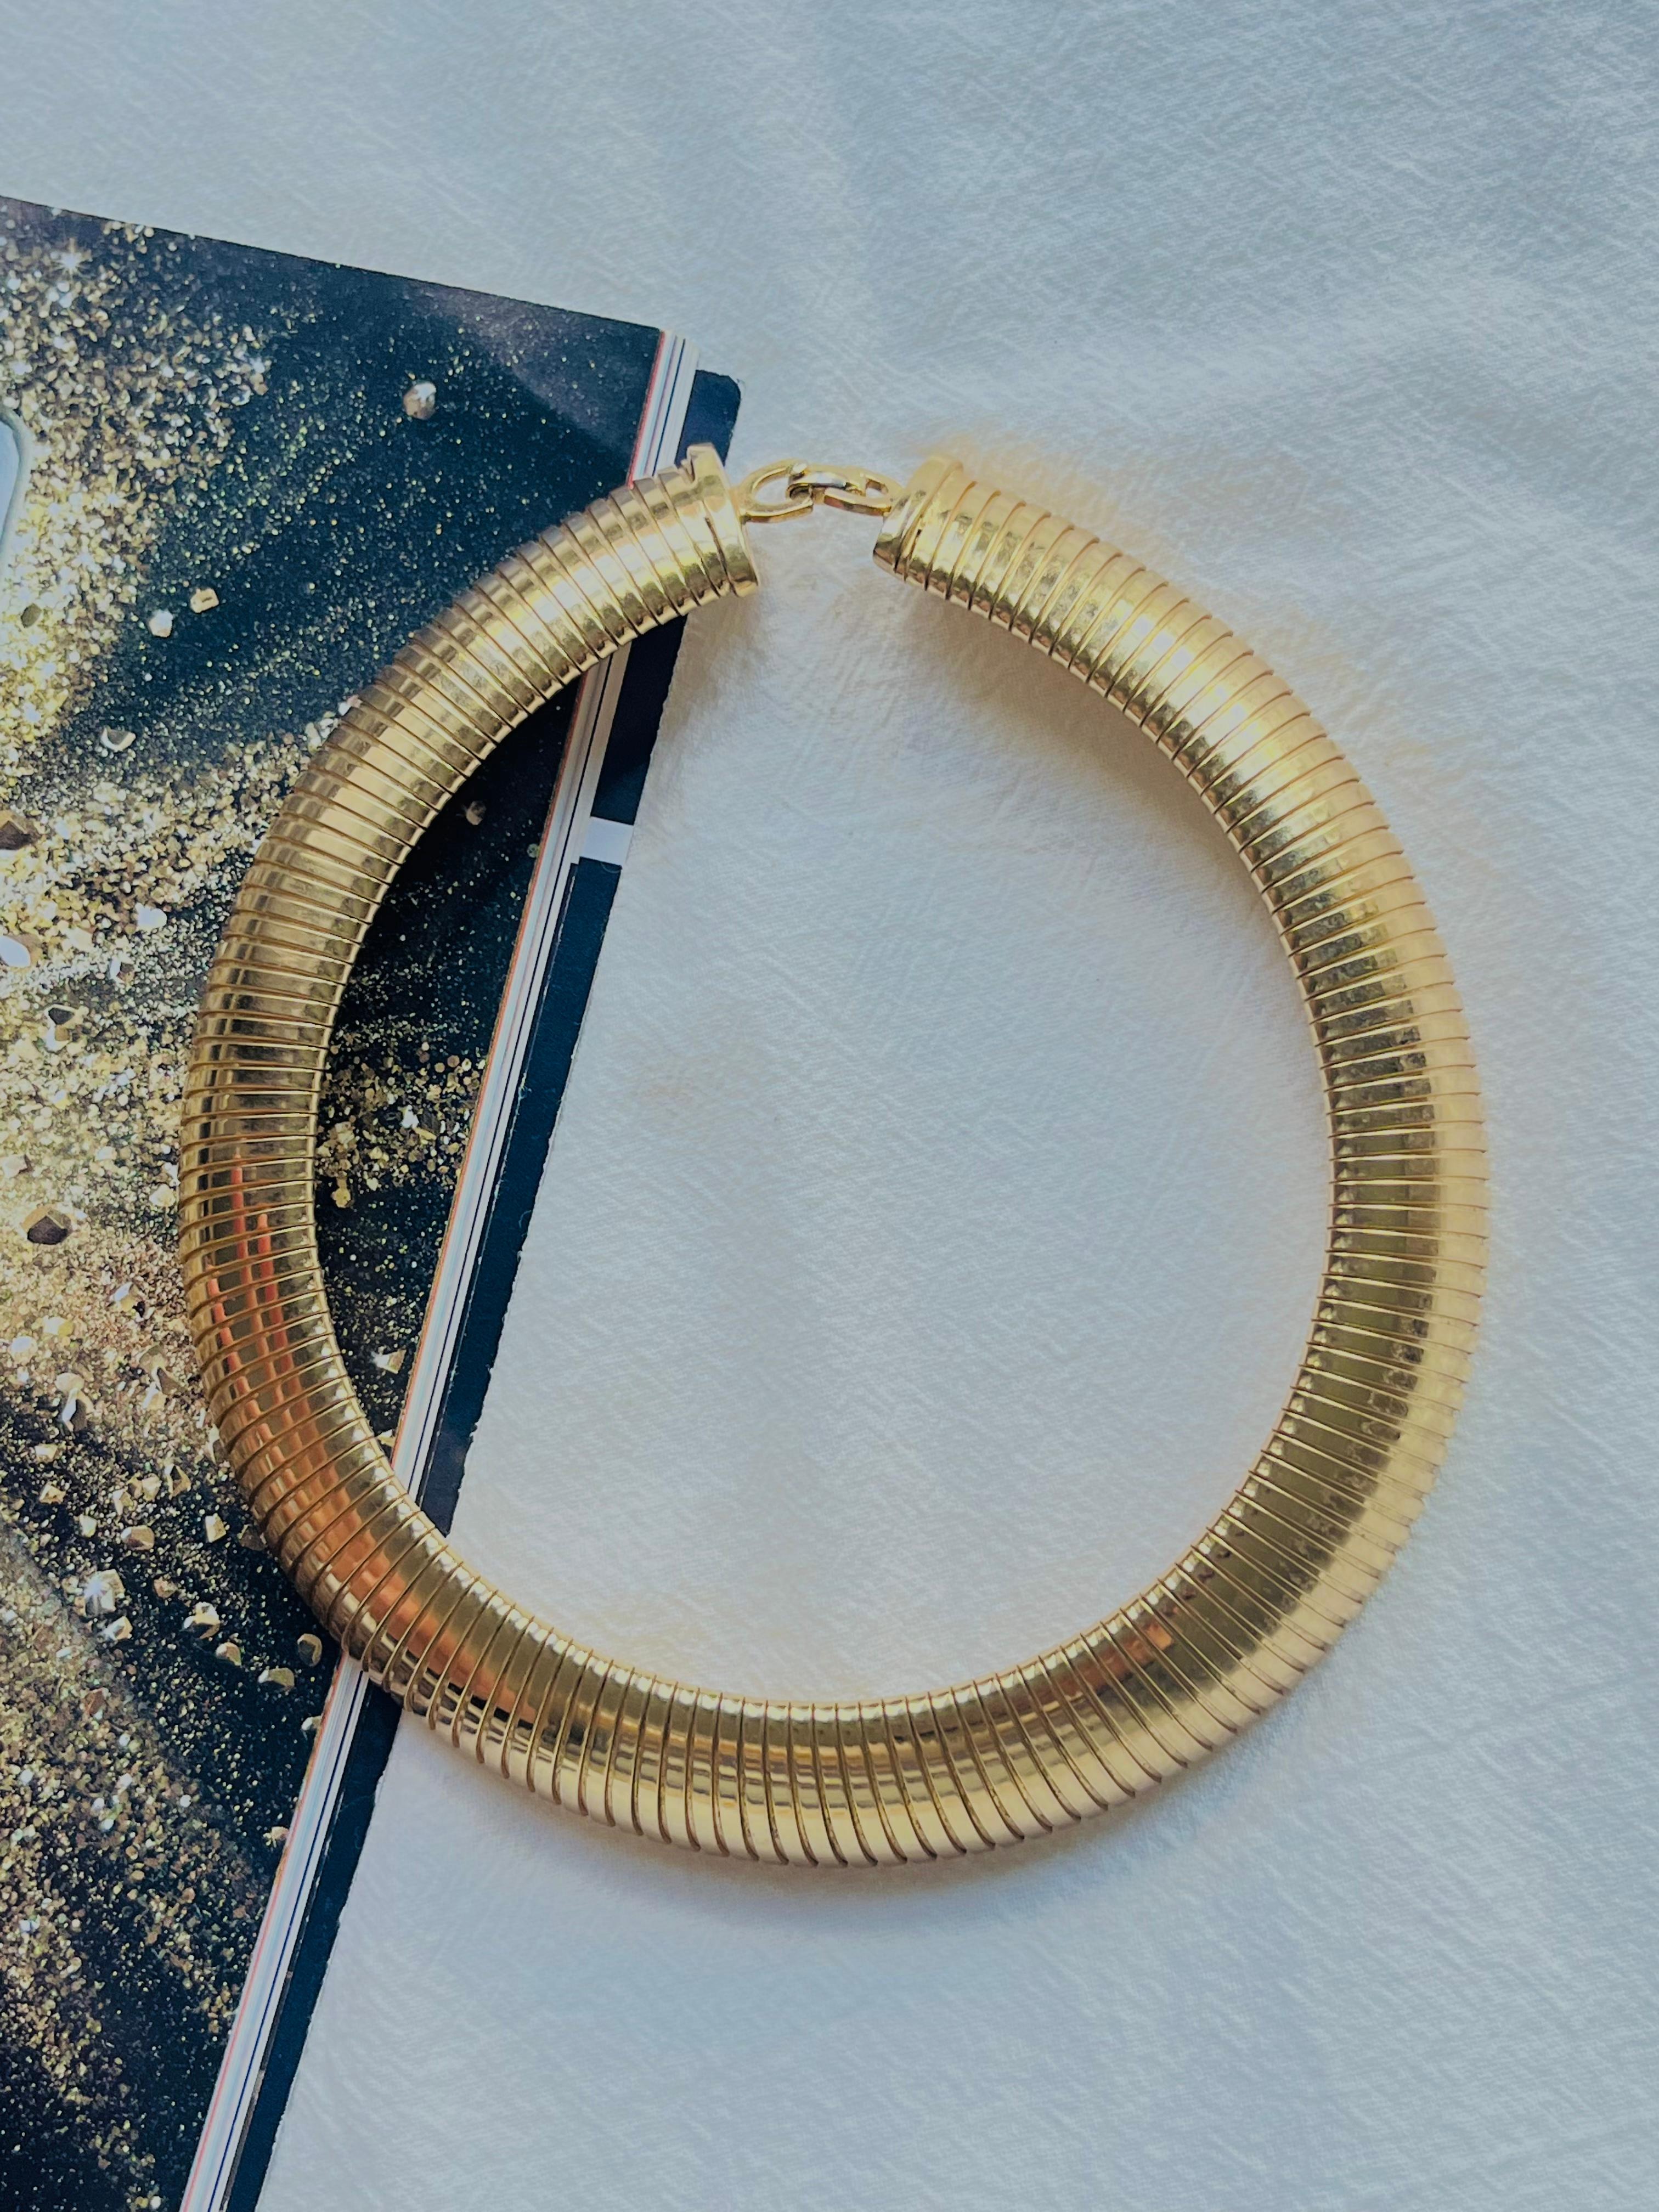 Christian Dior Vintage 1980s Unisex Extra Wide Adjustable Ribbed Omega Snake Choker Necklace, Gold Plated

Very good condition. Light scratches or colour loss, barely noticeable. 100% Genuine.

Crafted from polished gold plated with a circular